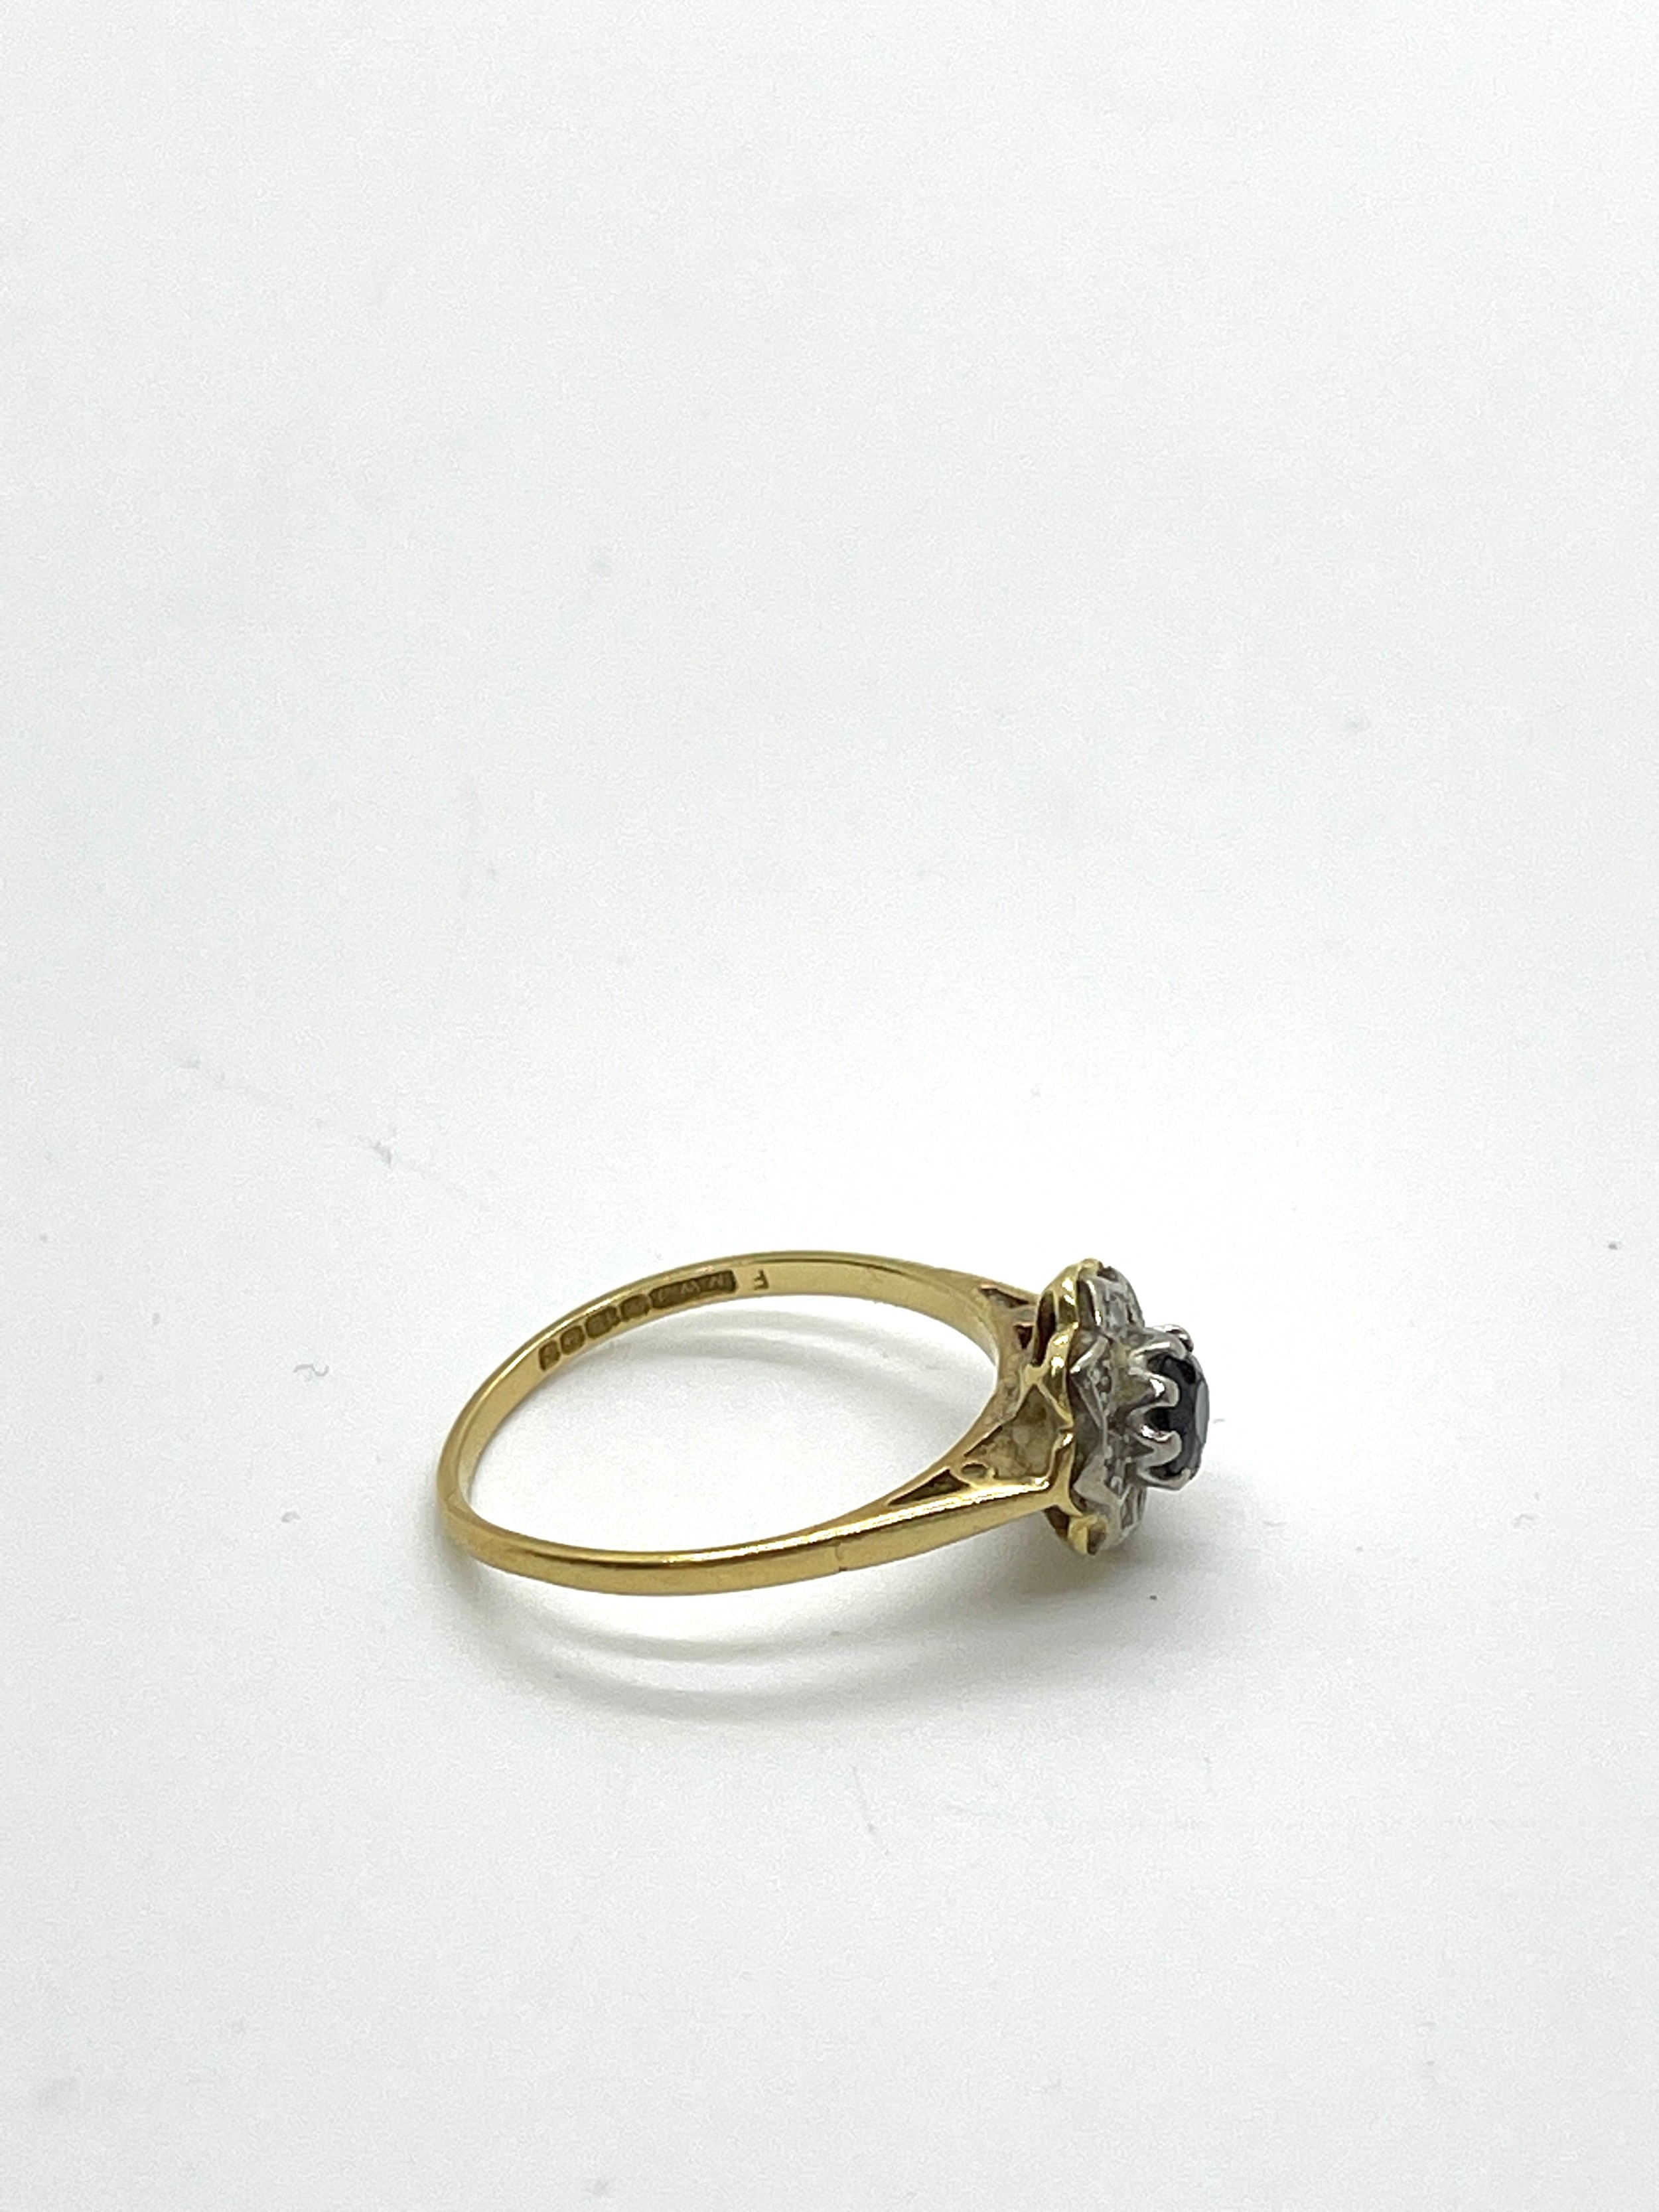 18ct Gold Diamond and Sapphire dress ring, total weight 2.6 grams - Image 4 of 6